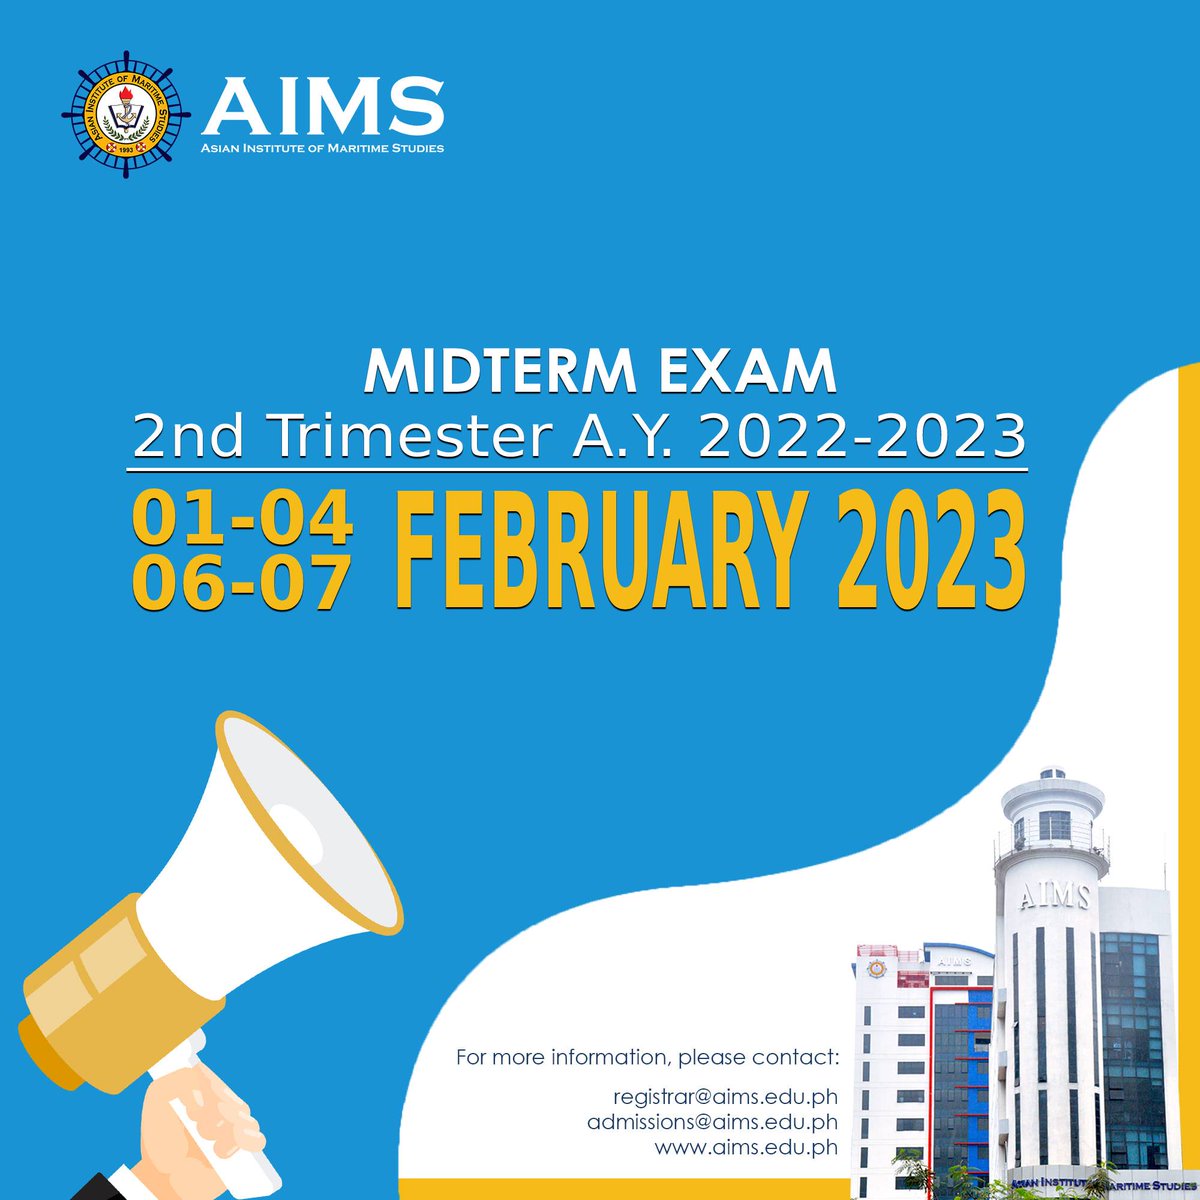 #BeInformed
2nd Trimester AY 2022-2023 
Midterm Examination Schedule 
February 01-04 and 06-07, 2023
#AIMS #ExperienceAIMS #AIMSyan
#WeAreAIMS #AIMSpowered #TatakAIMS